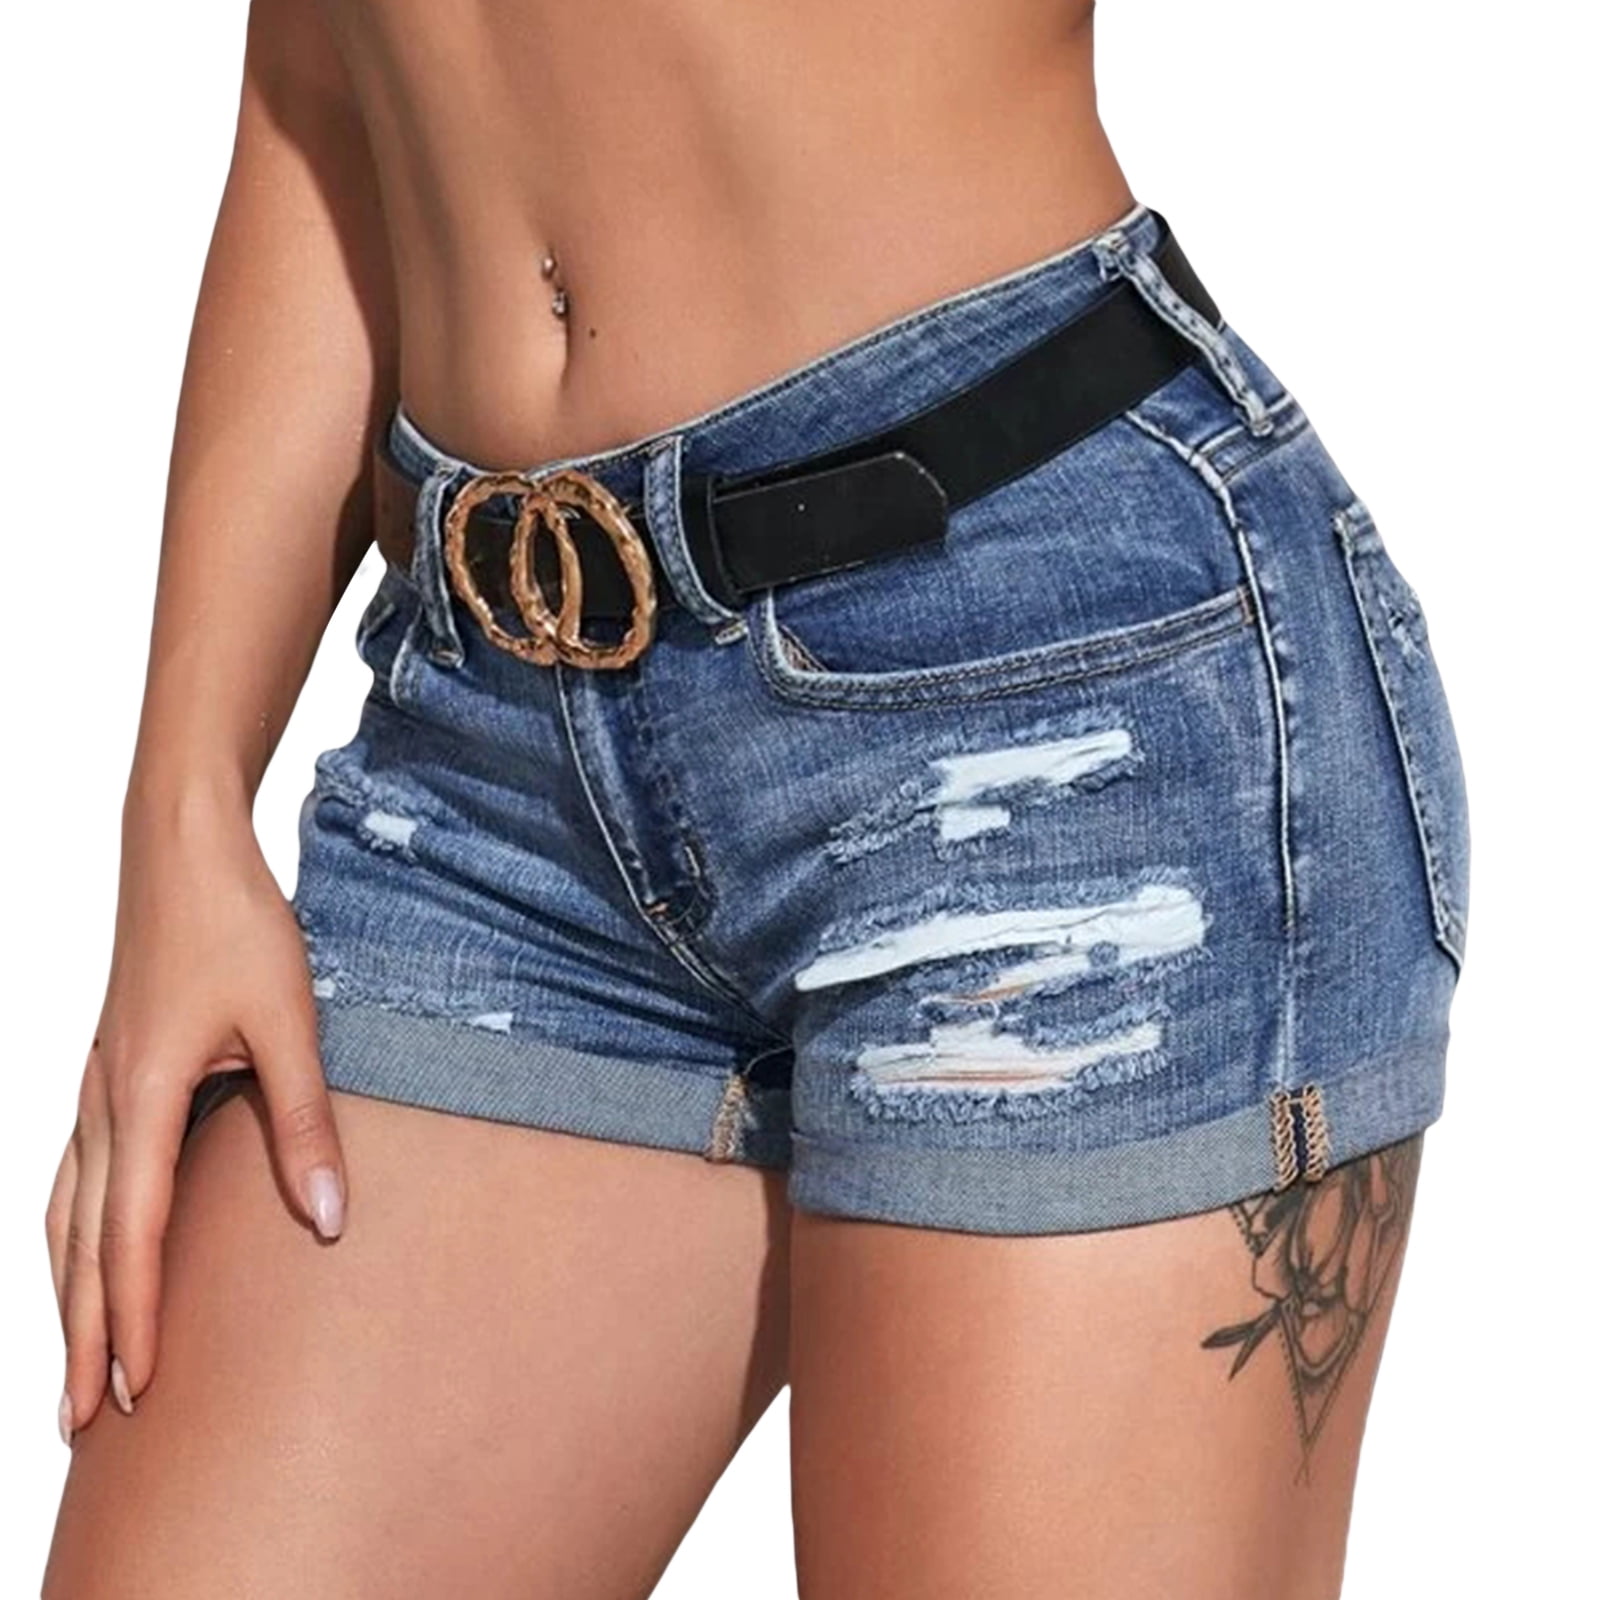 Women Shorts Mid Waist Strechy Skinny Roll Up Jeans Ripped Hole Shorts Casual Spray Paint Denim Pants 